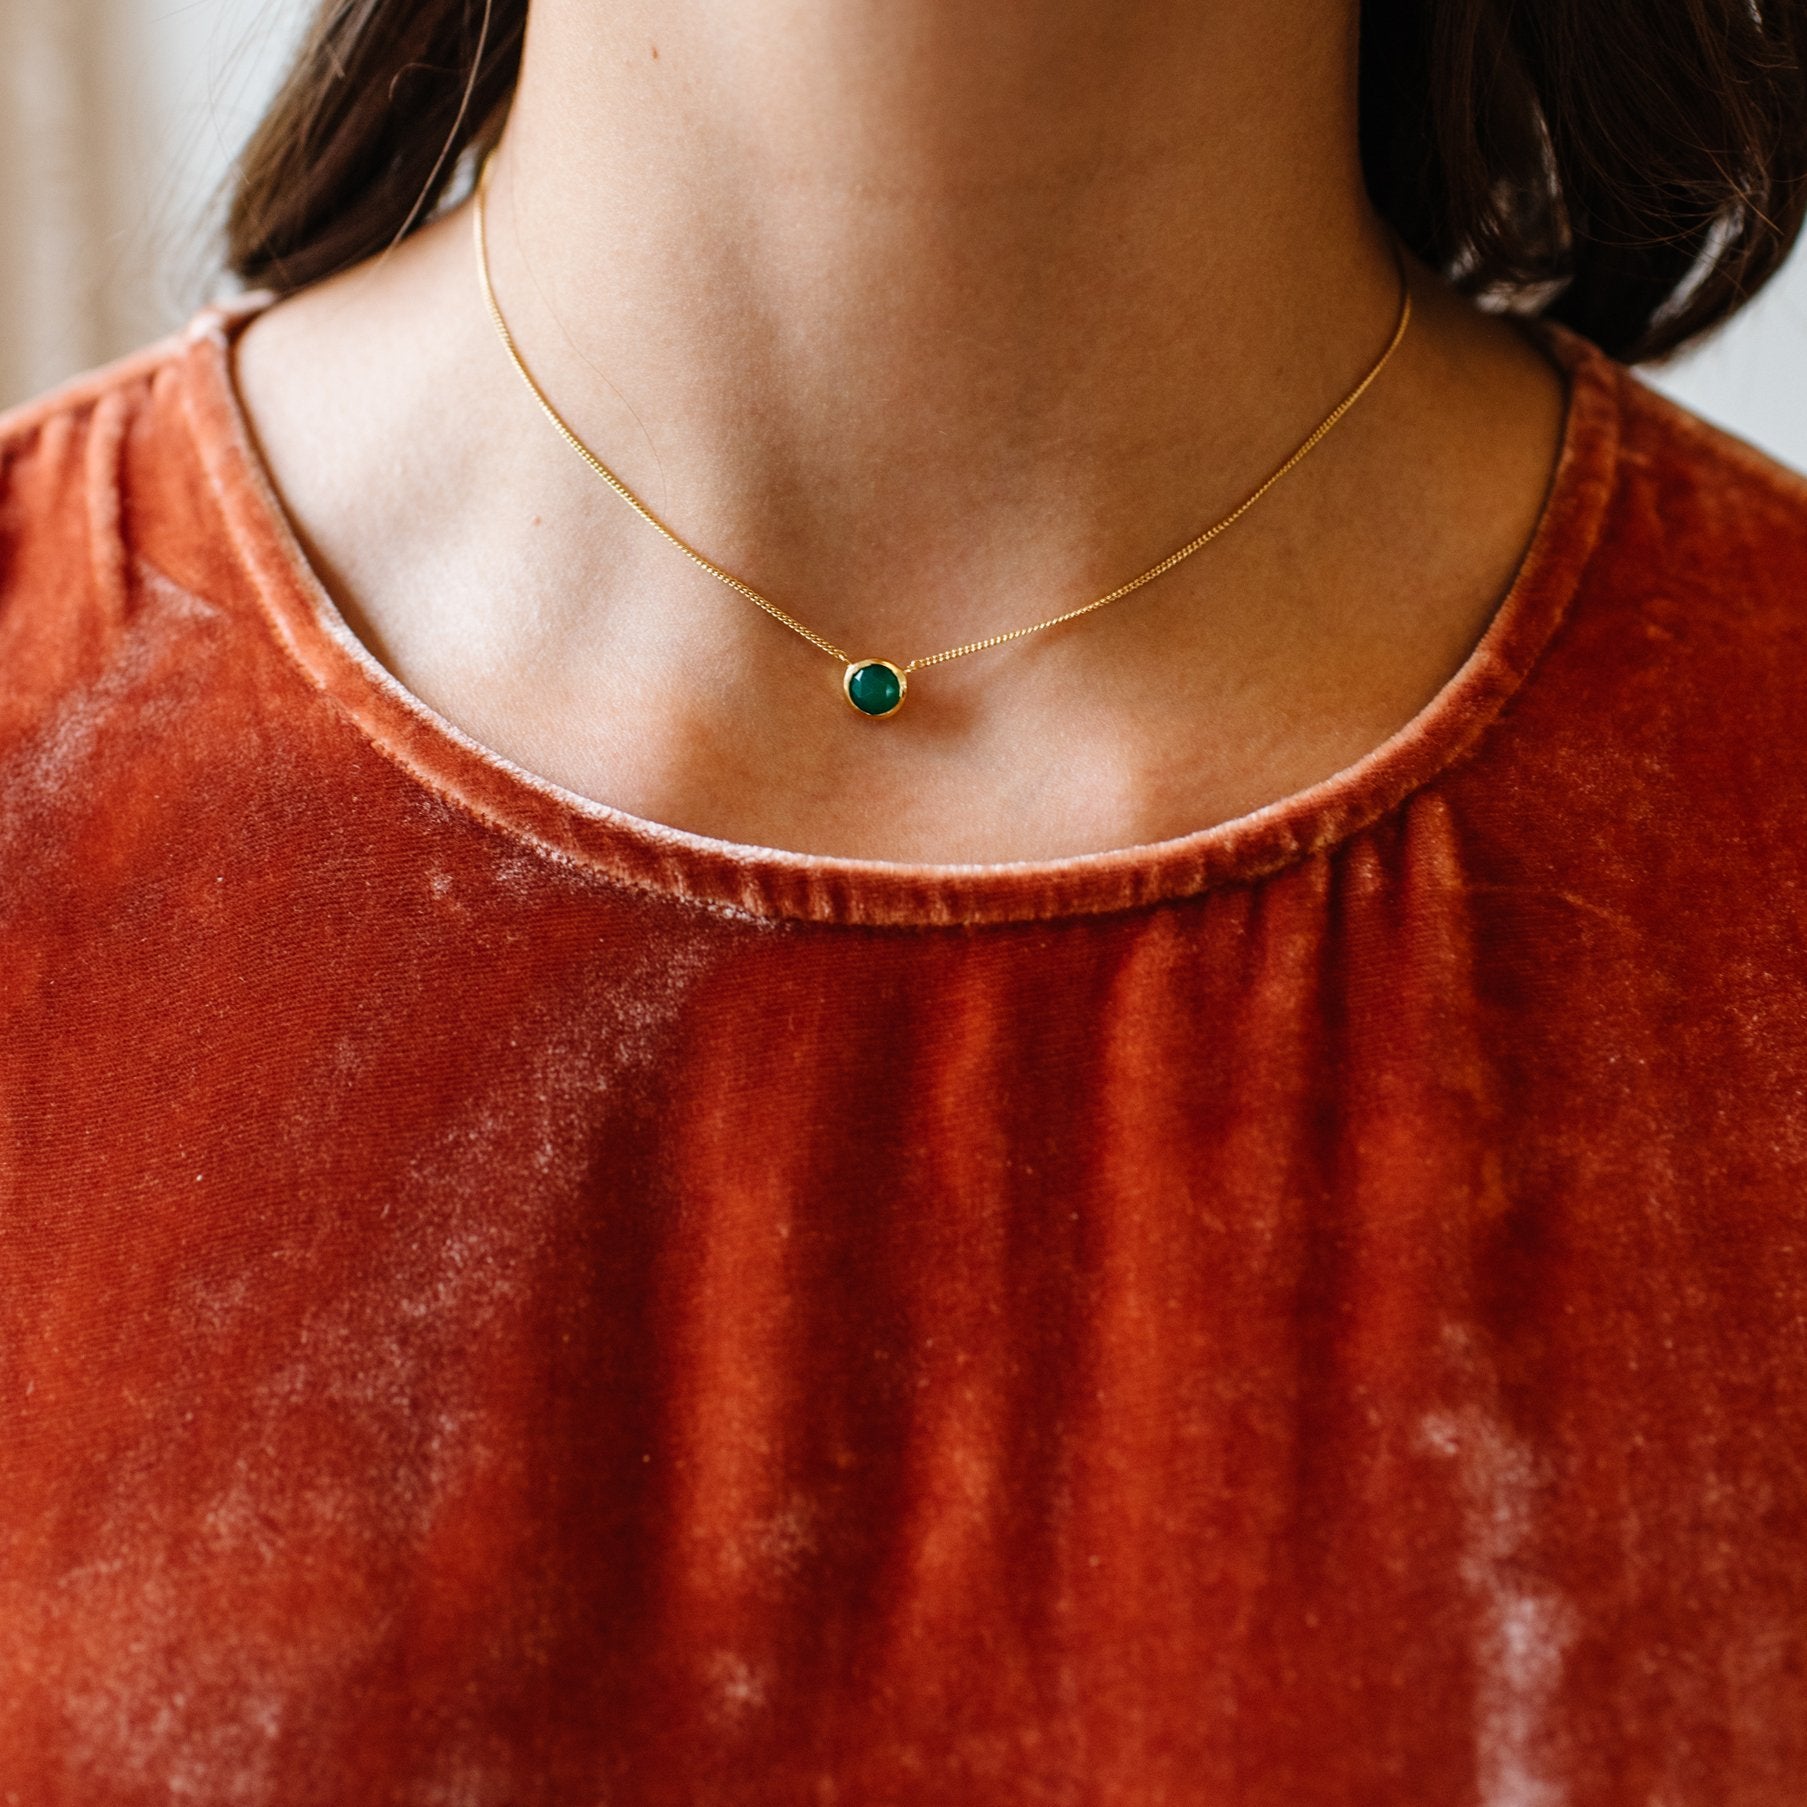 DAINTY LEGACY NECKLACE - GREEN ONYX & GOLD - SO PRETTY CARA COTTER